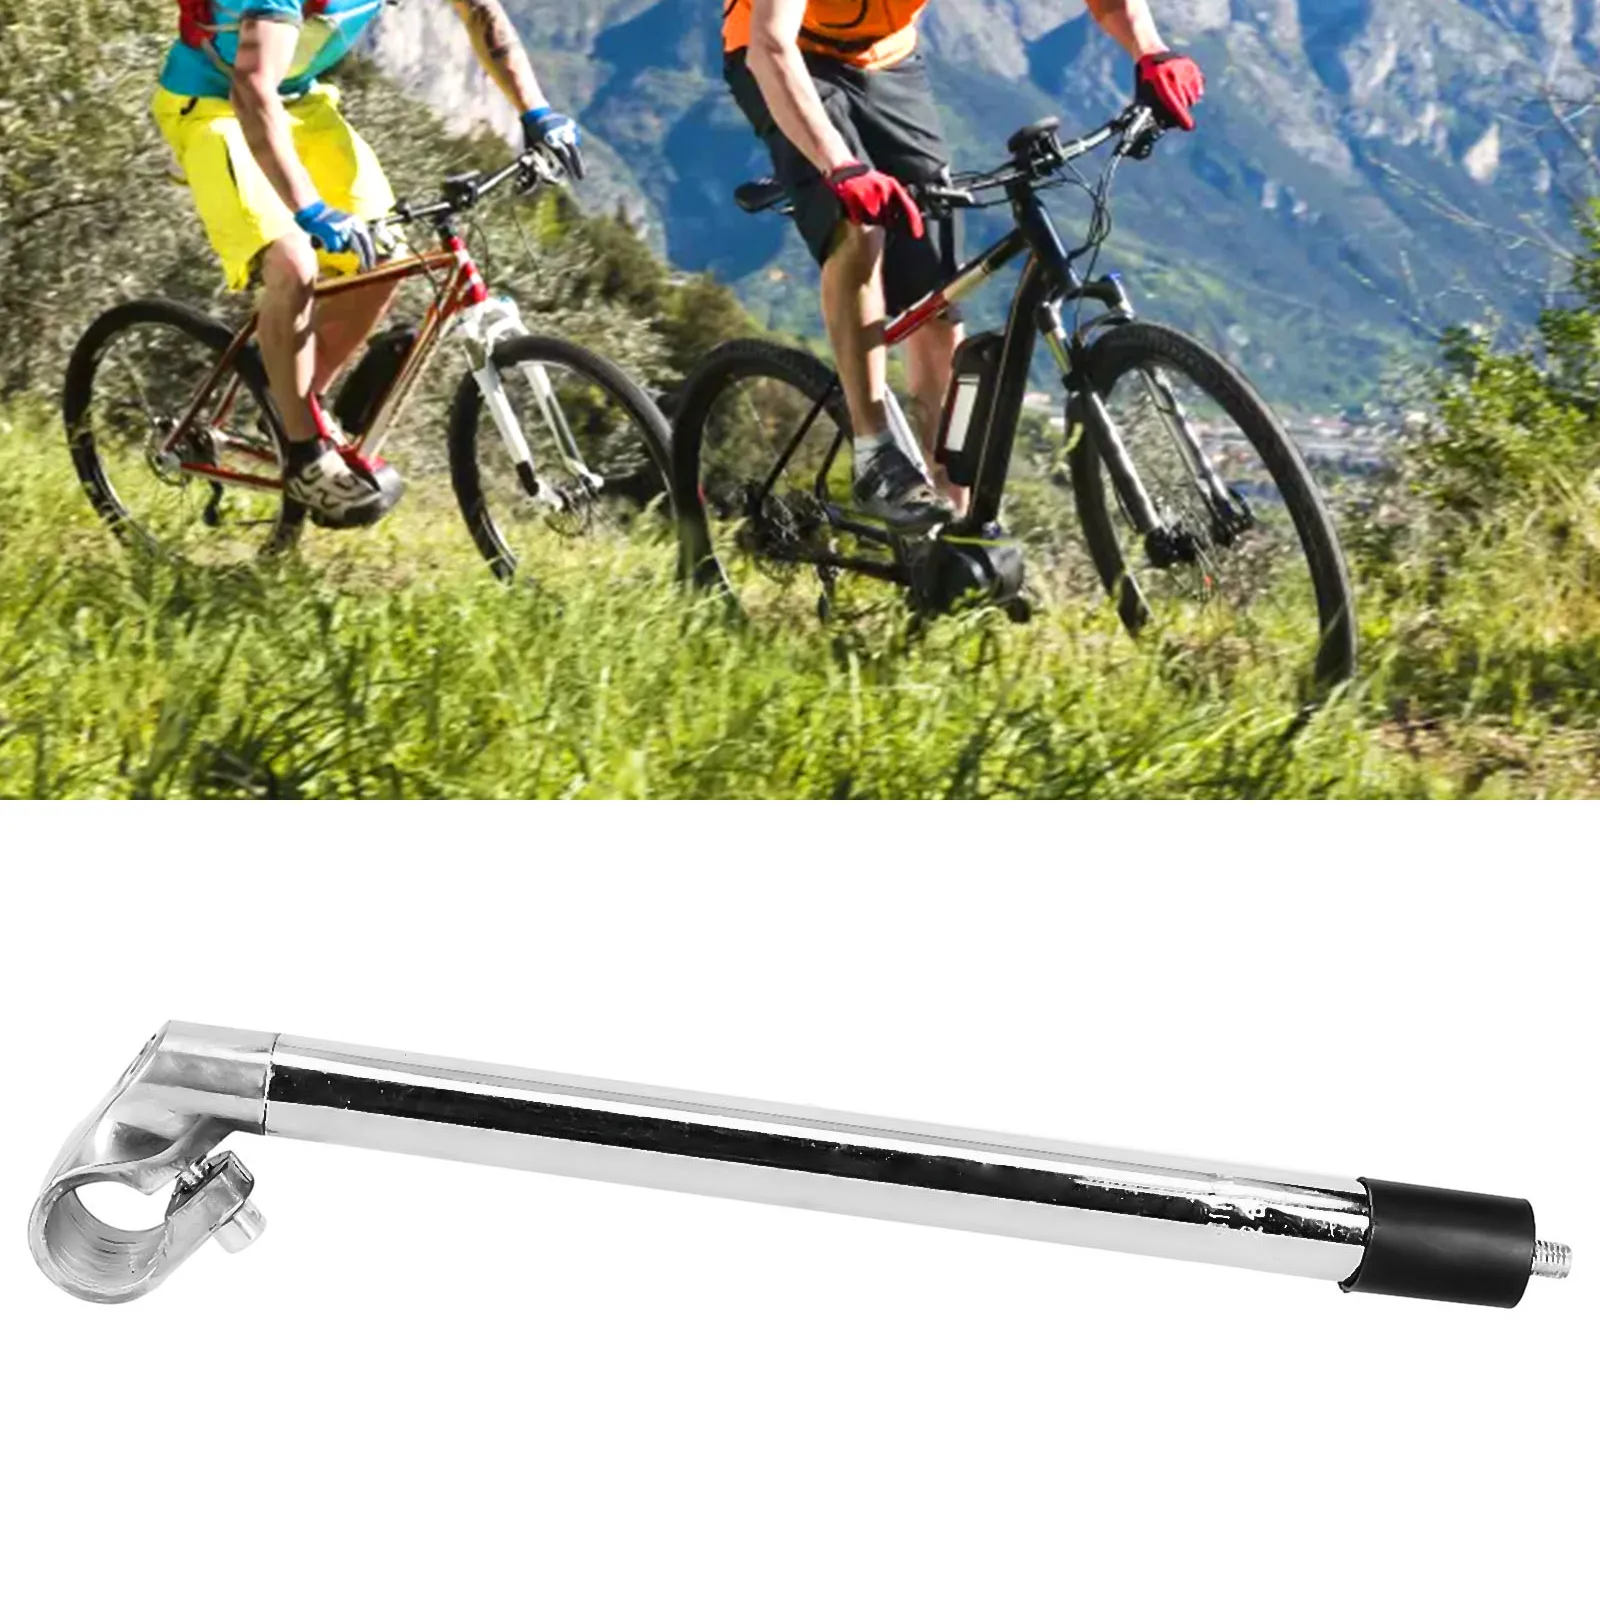 

Durable Newest Top-quality Xmas Gift 1PC 22.2mm Handlebar Bike Quill Stem Cycling MTB Mountain Bike Road Cycle